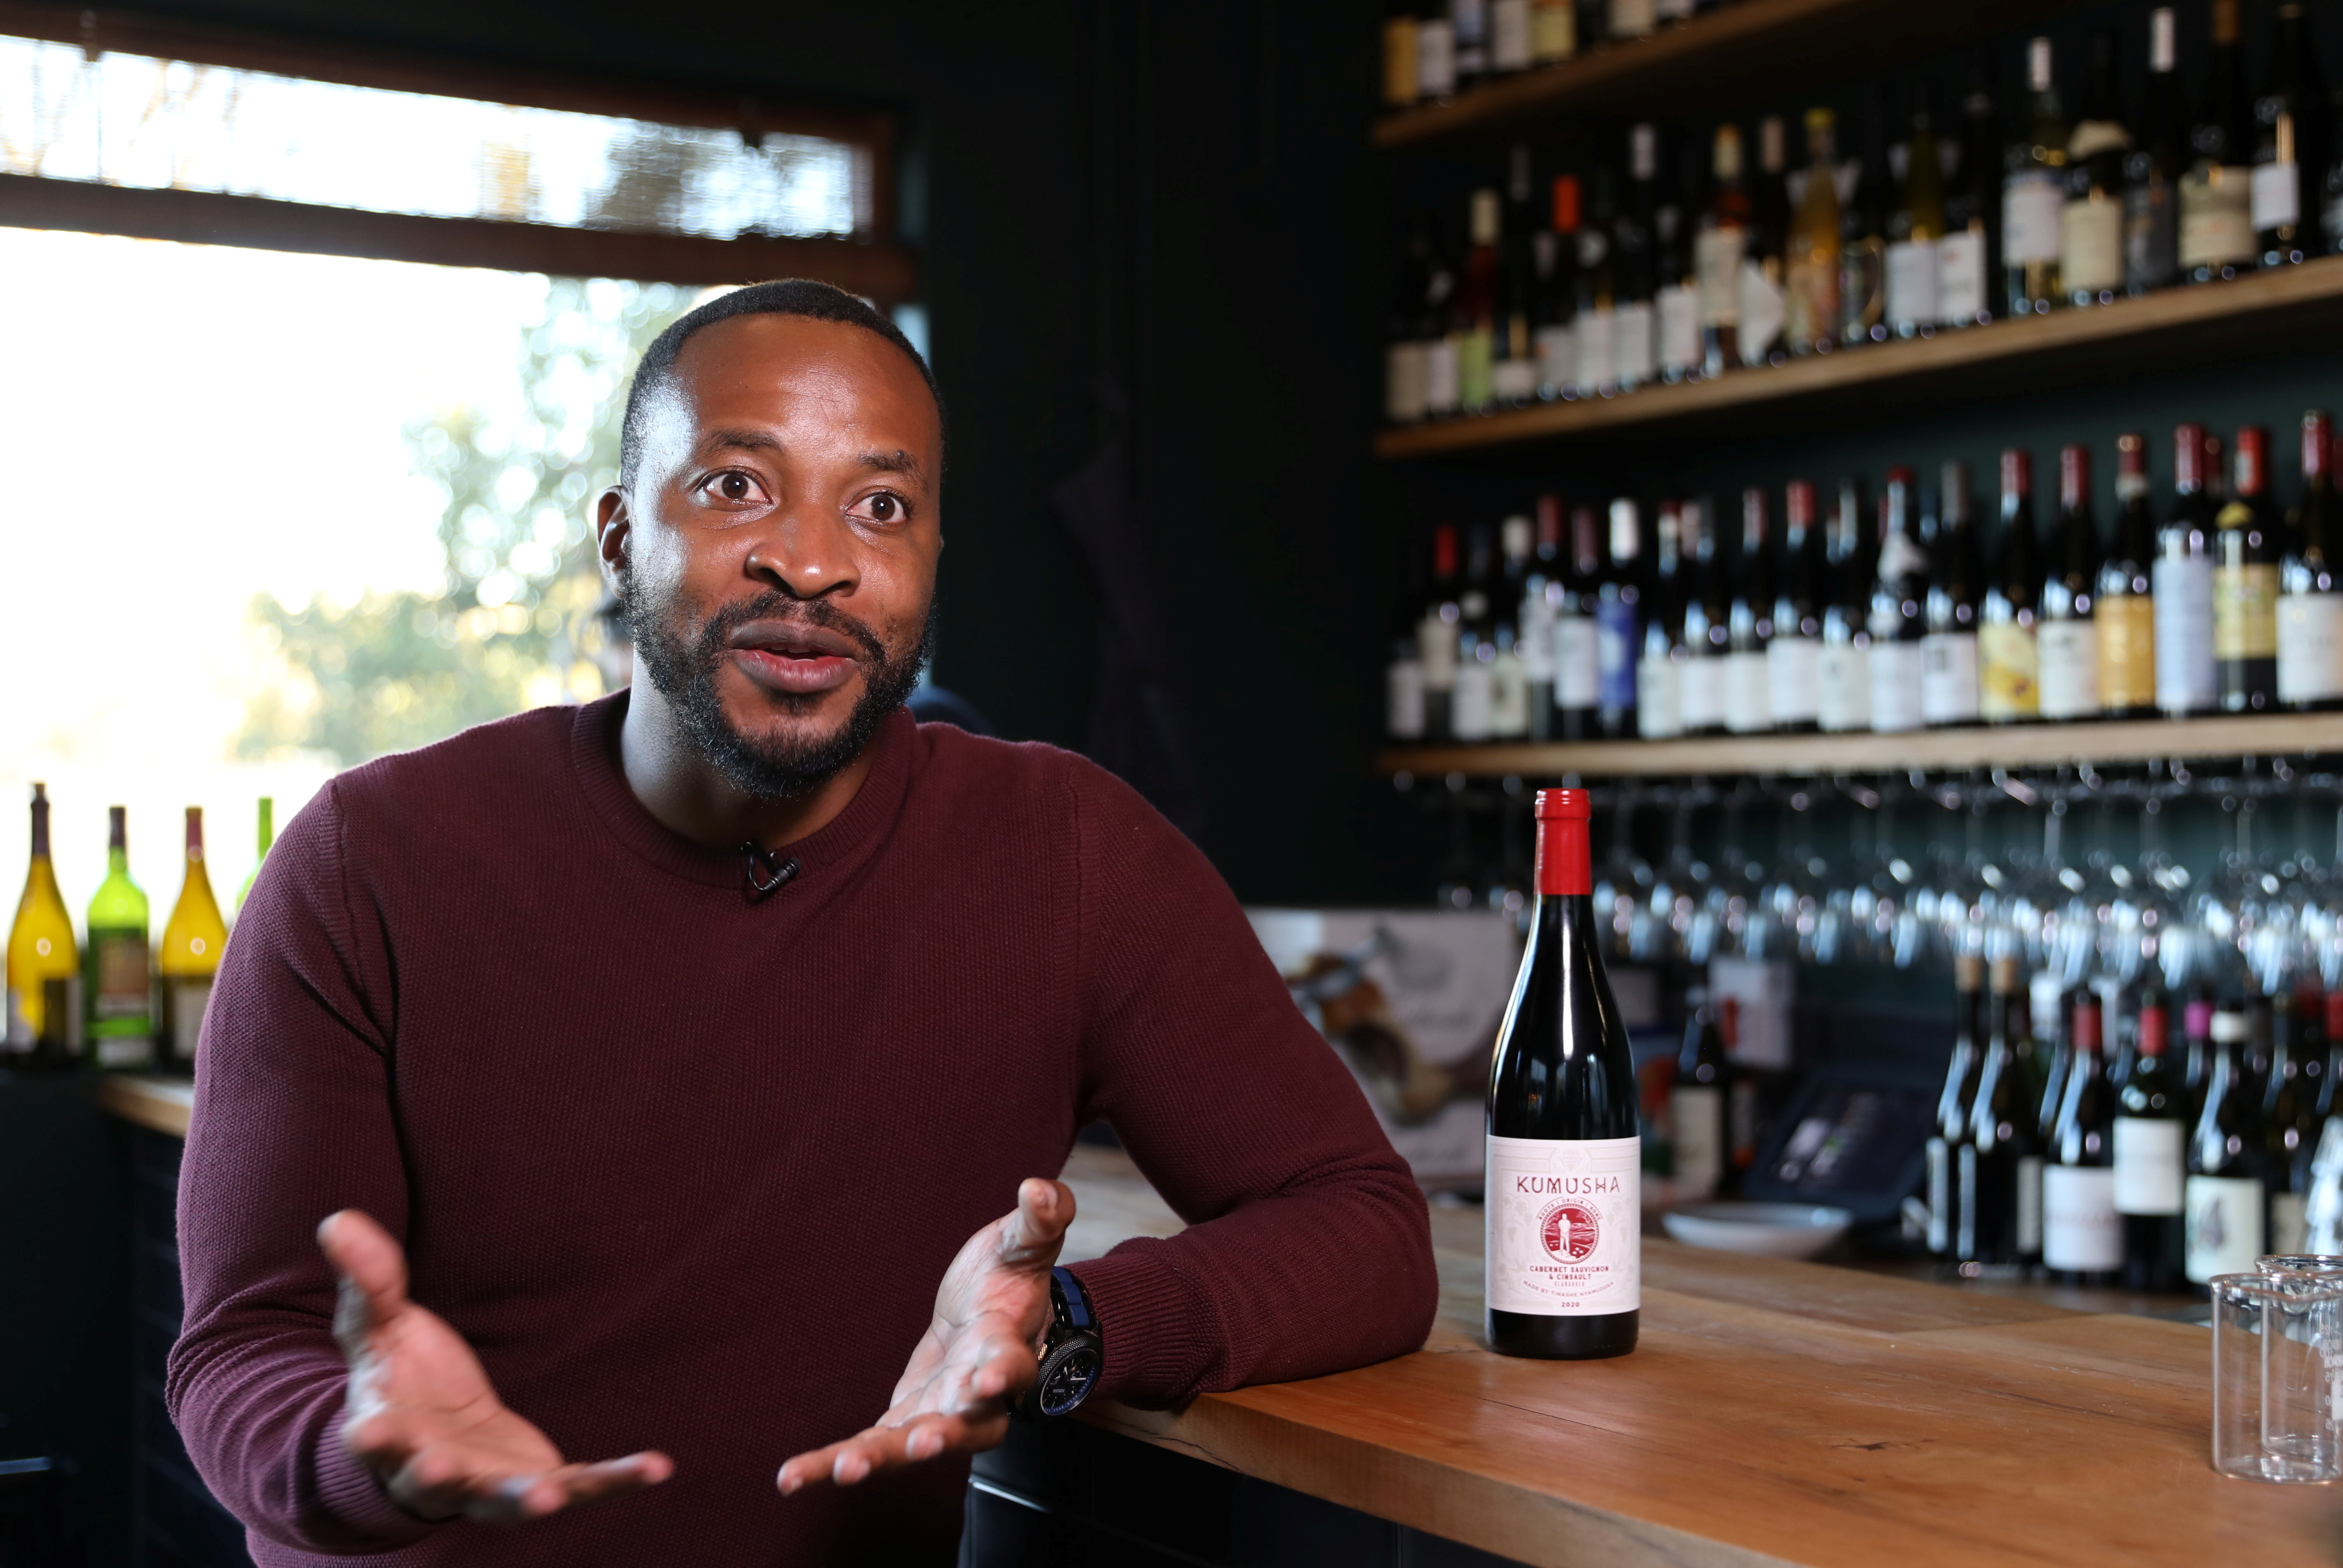 Zimbabwean Tinashe Nyamudoka, a famed sommelier with his own wine brand, gestures as he speaks during an interview with Reuters in Johannesburg, South Africa, June 25, 2021. REUTERS/Siphiwe Sibeko.